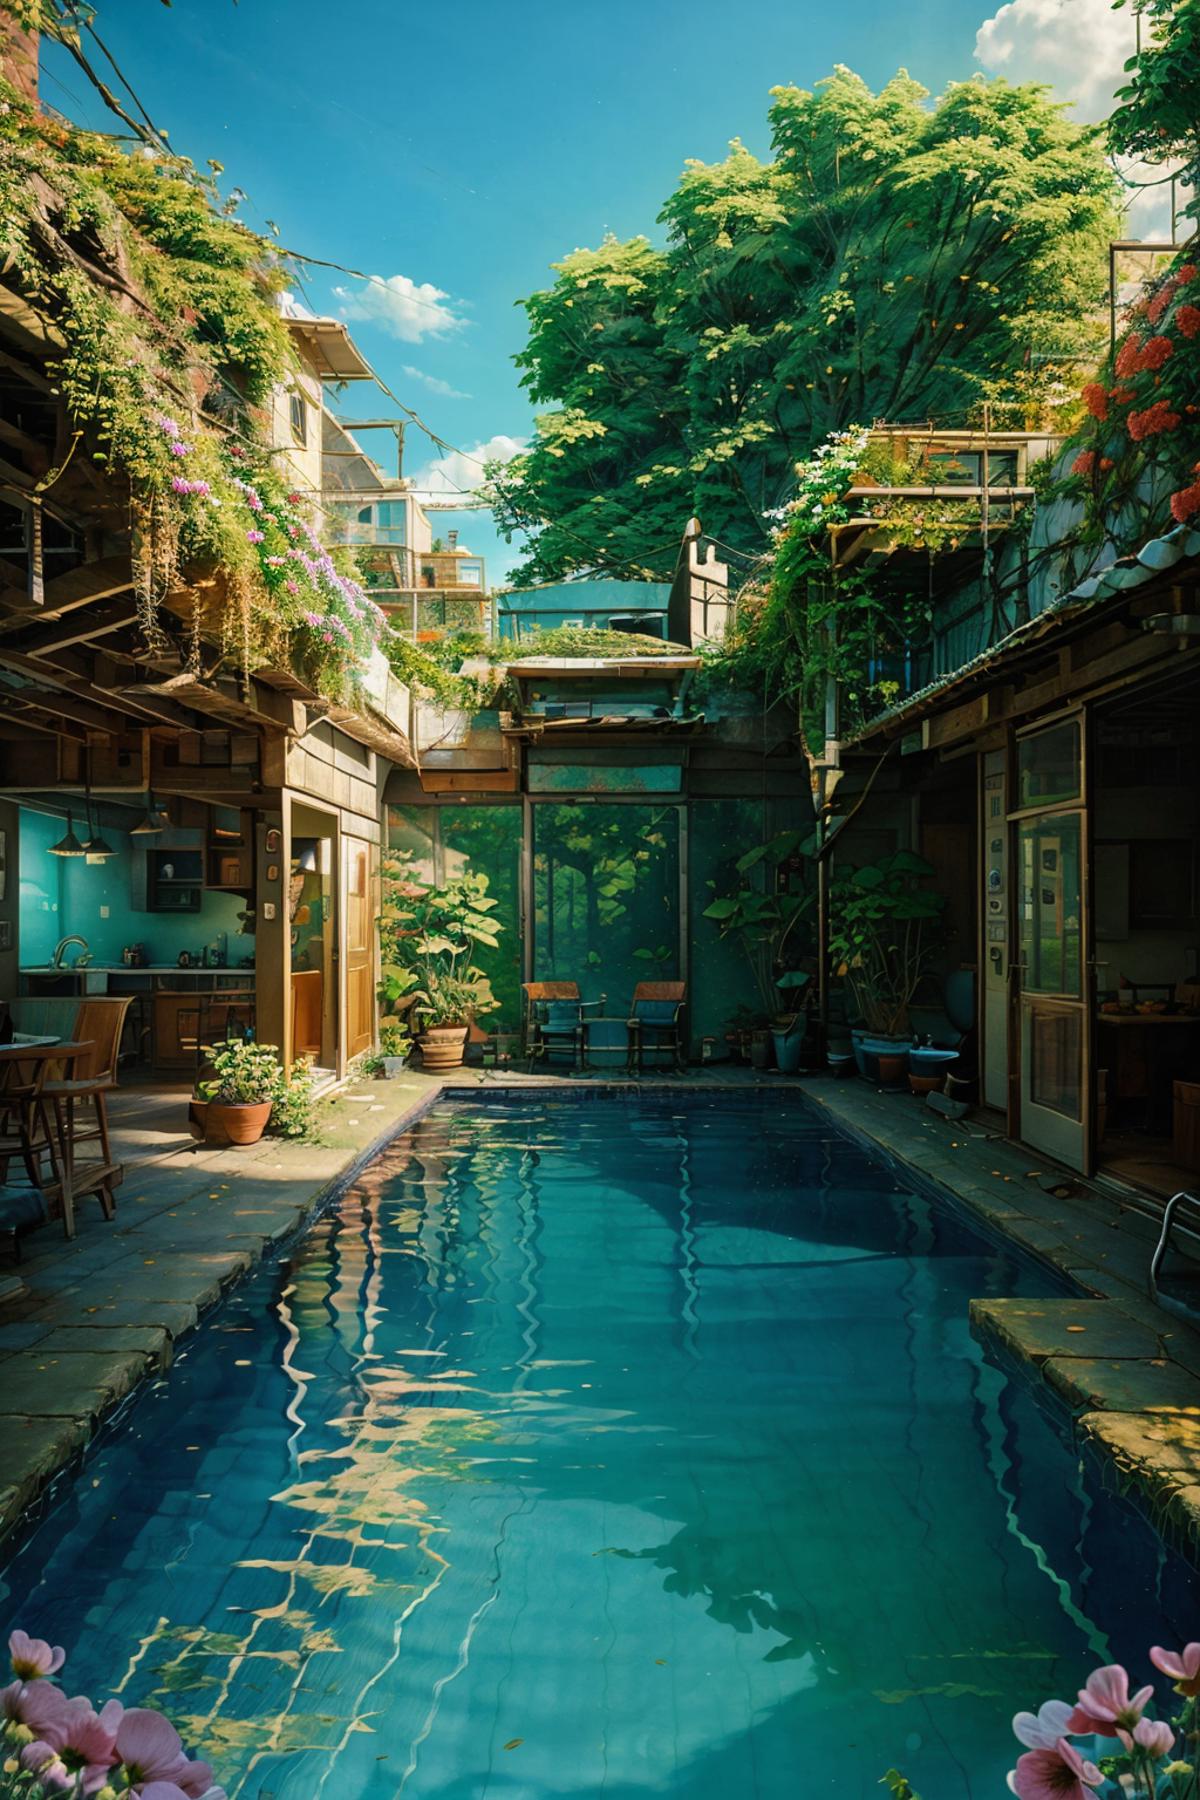 A blue swimming pool in a backyard with potted plants and chairs.